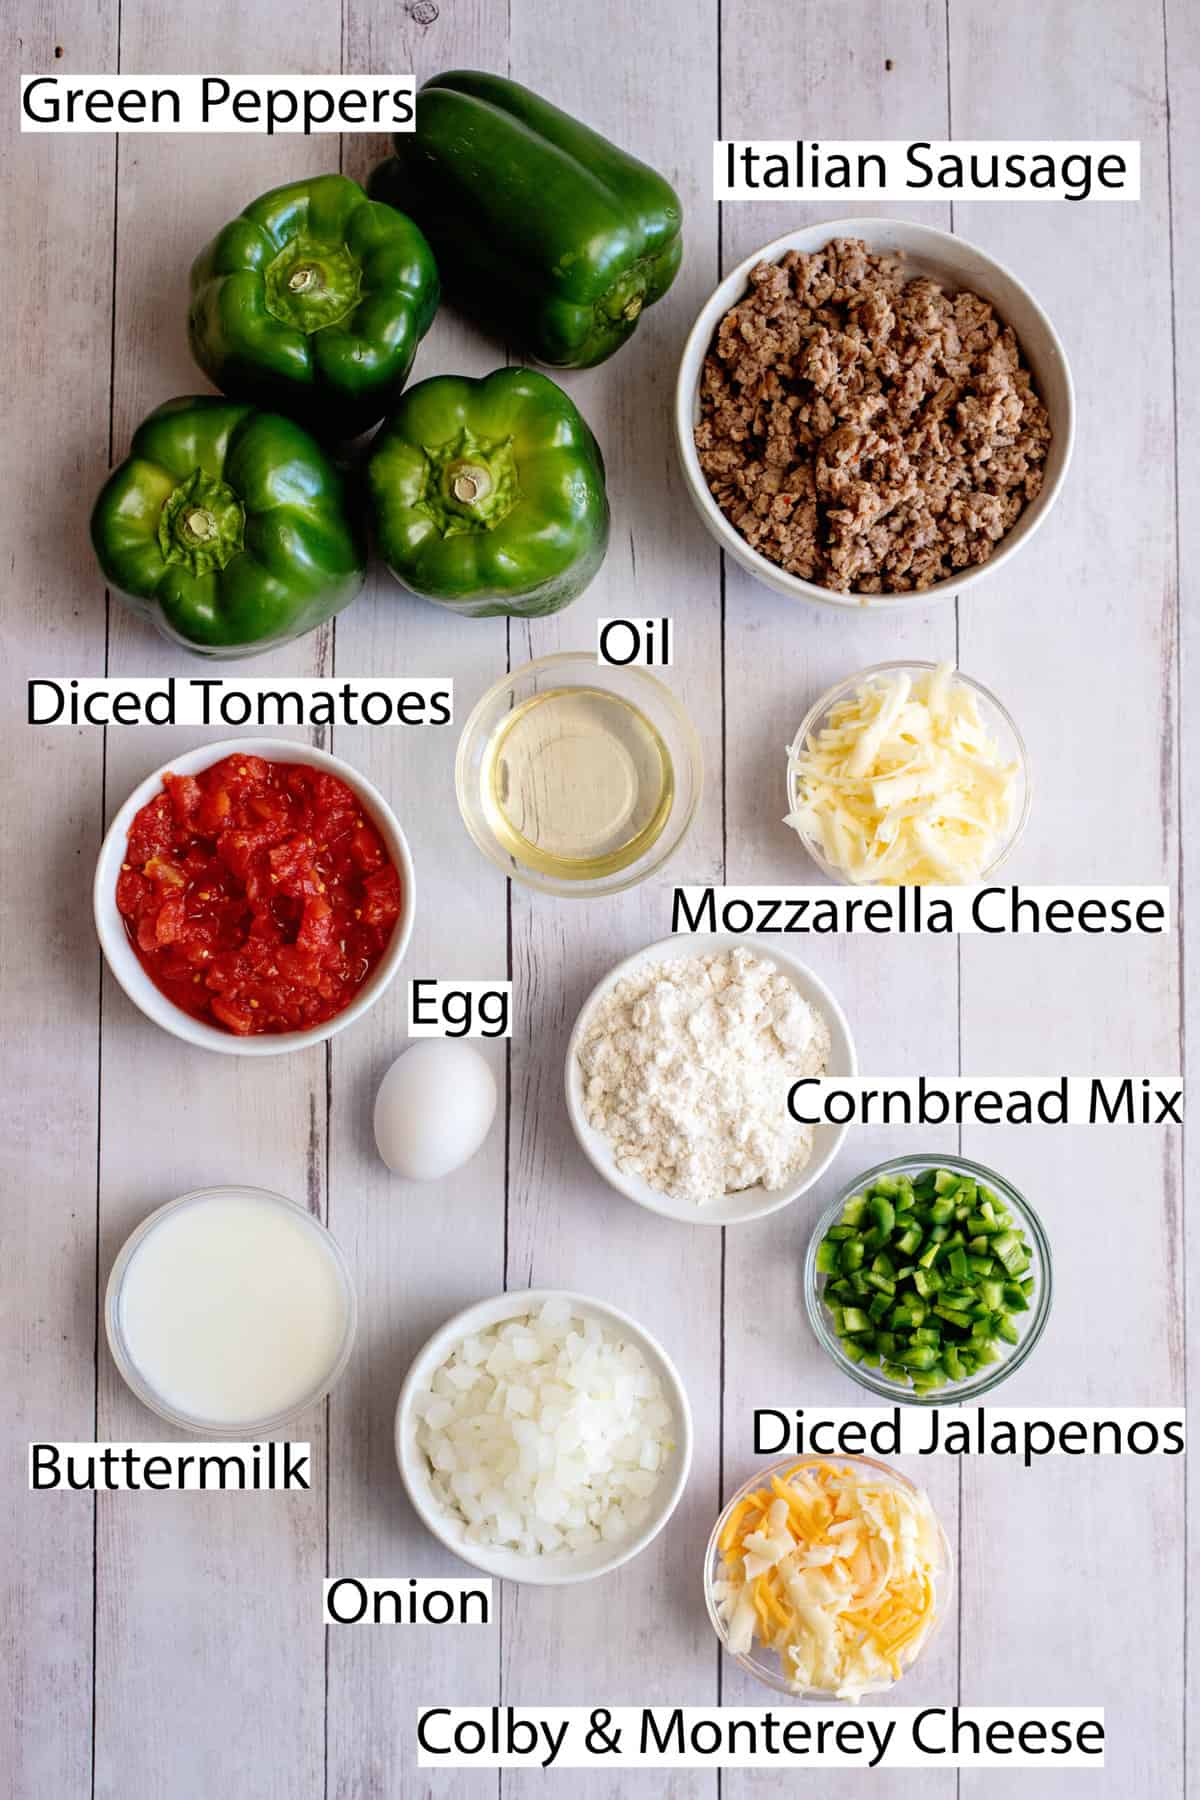 Labeled ingredients for Itallian sausage stuffed peppers.